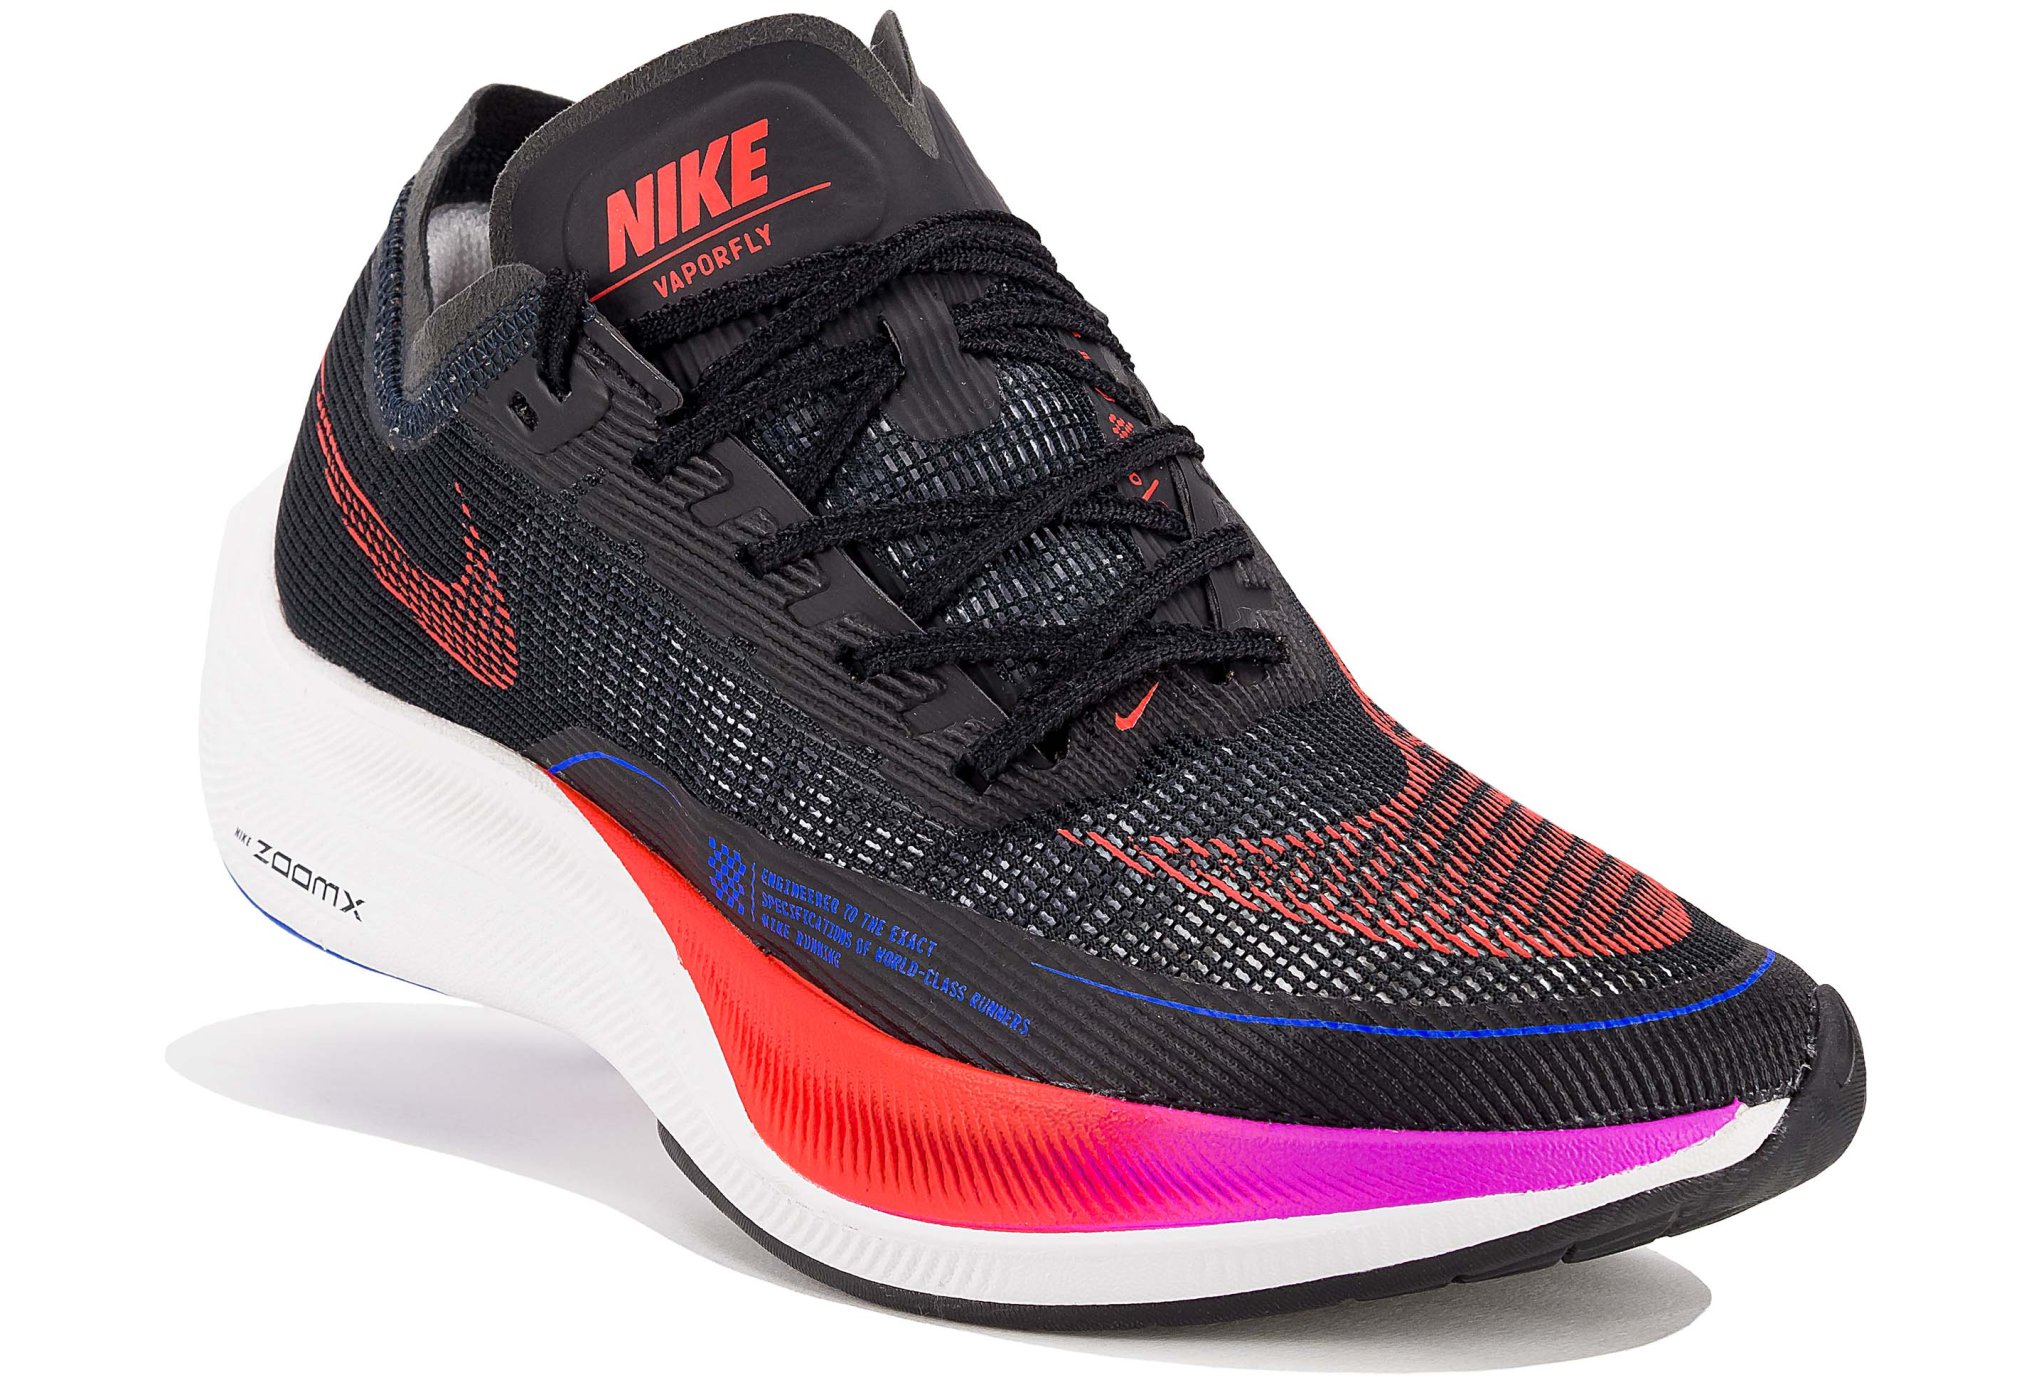 Nike ZoomX Vaporfly Next% 2 W Chaussures running femme